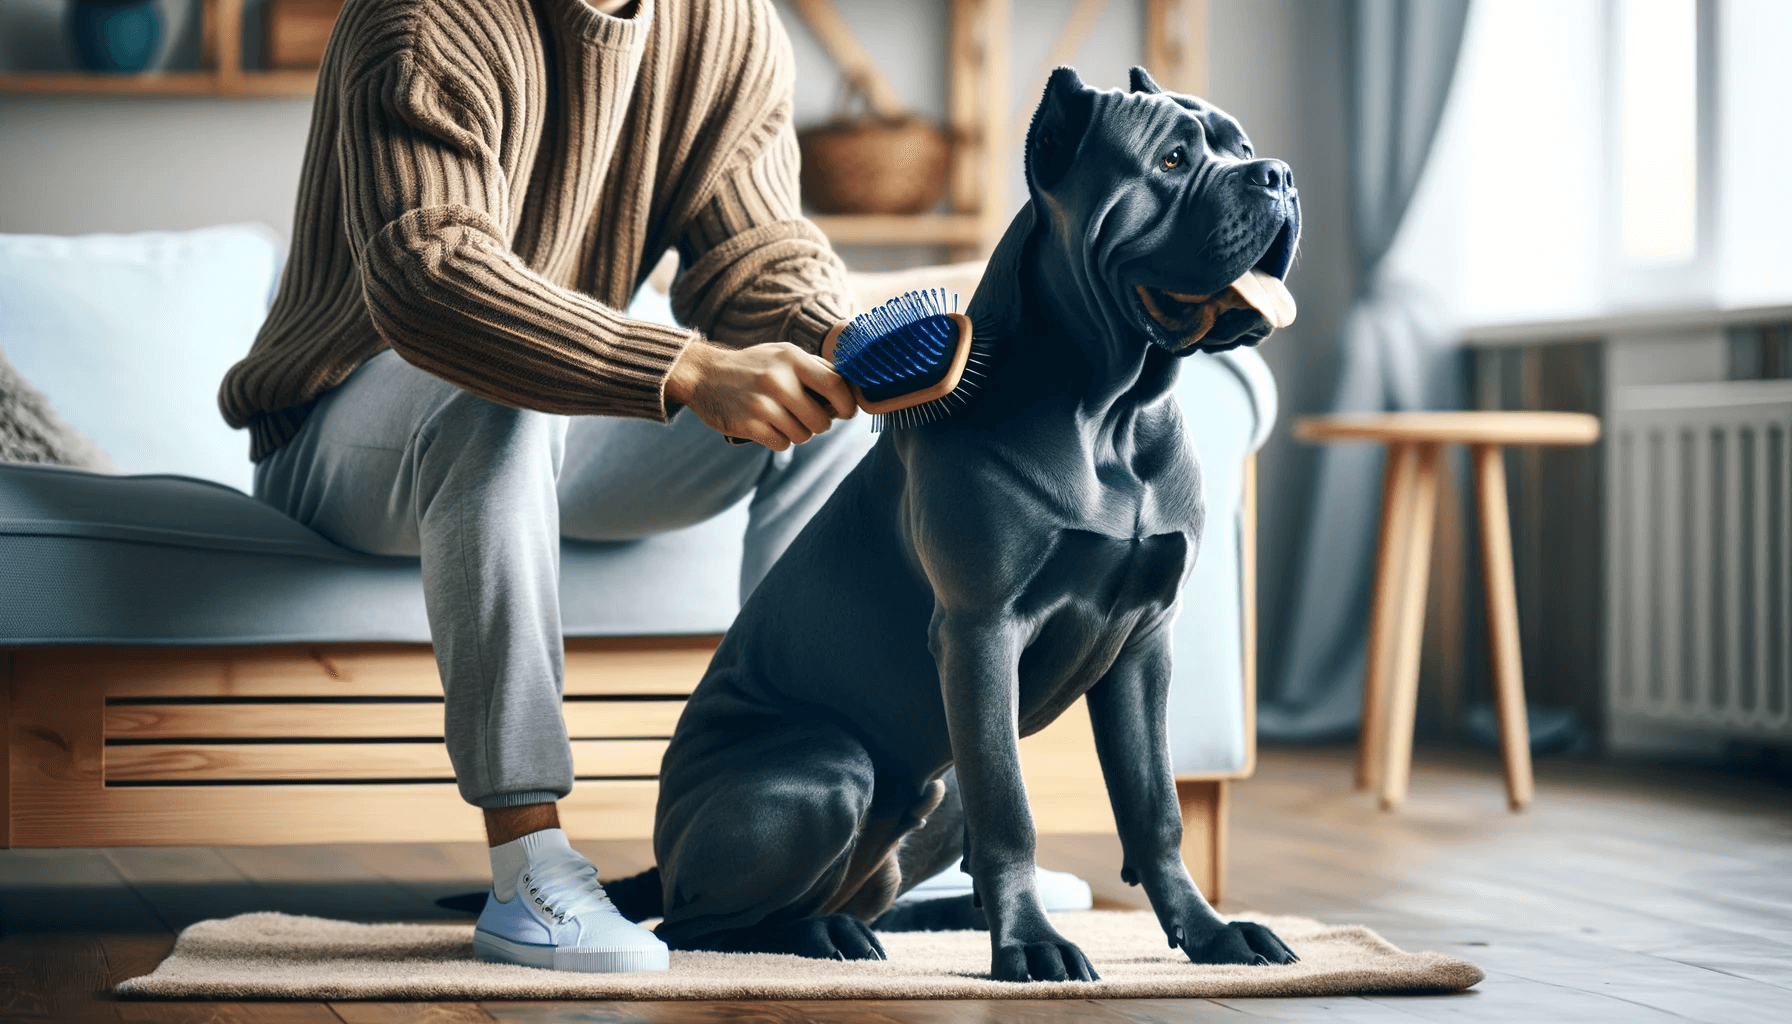 Blue Cane Corso Being Groomed by Its Owner in a Home Environment